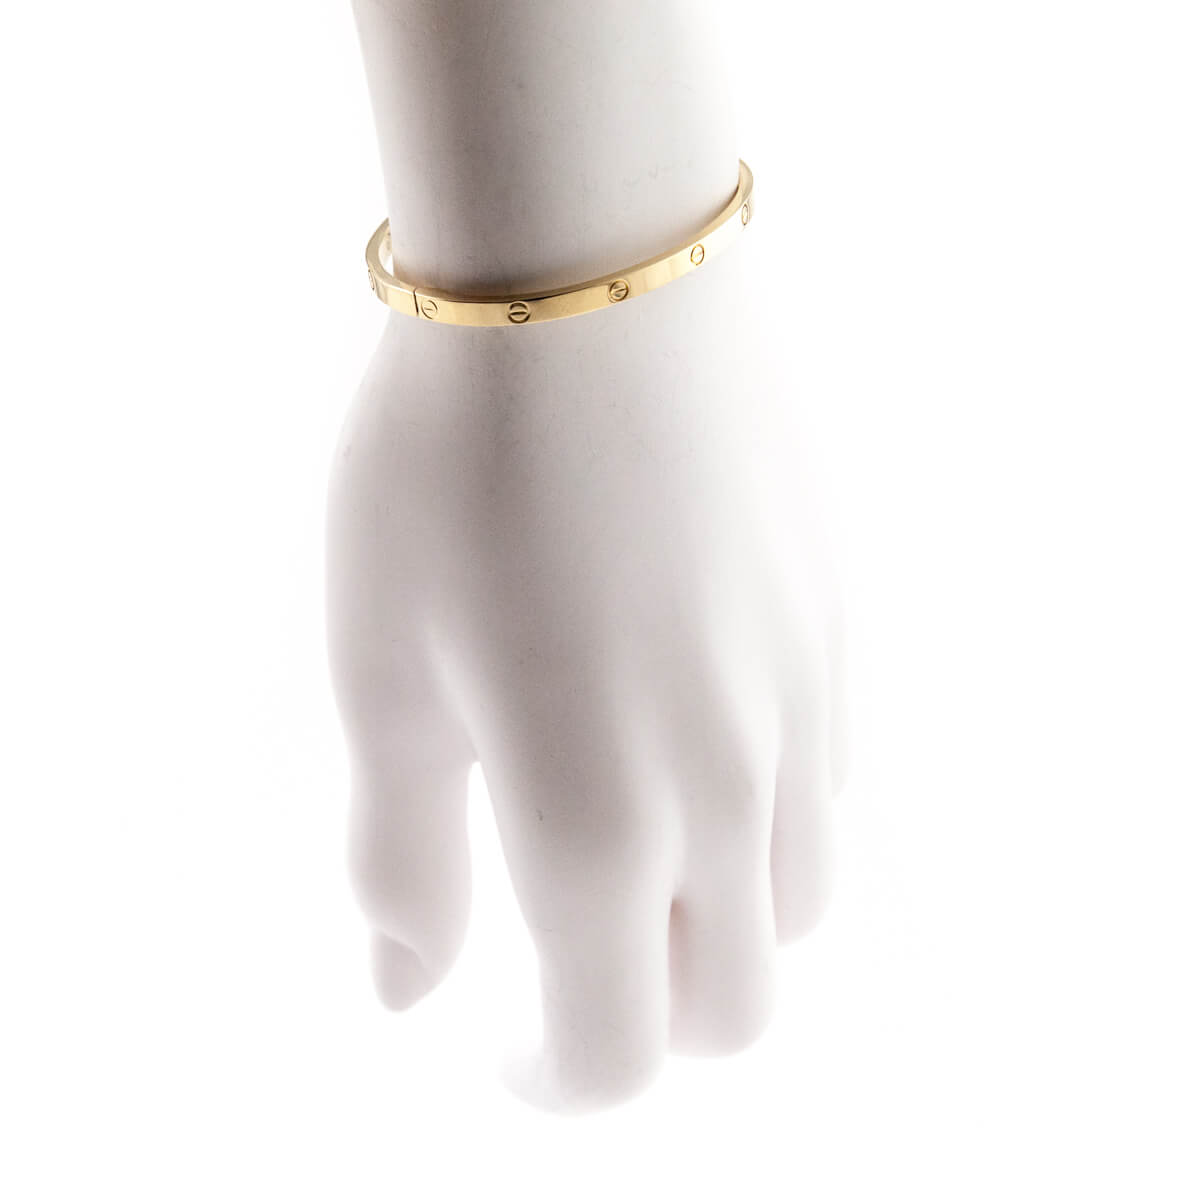 Cartier 18K Yellow Gold Small Love Bracelet - Love that Bag etc - Preowned Authentic Designer Handbags & Preloved Fashions